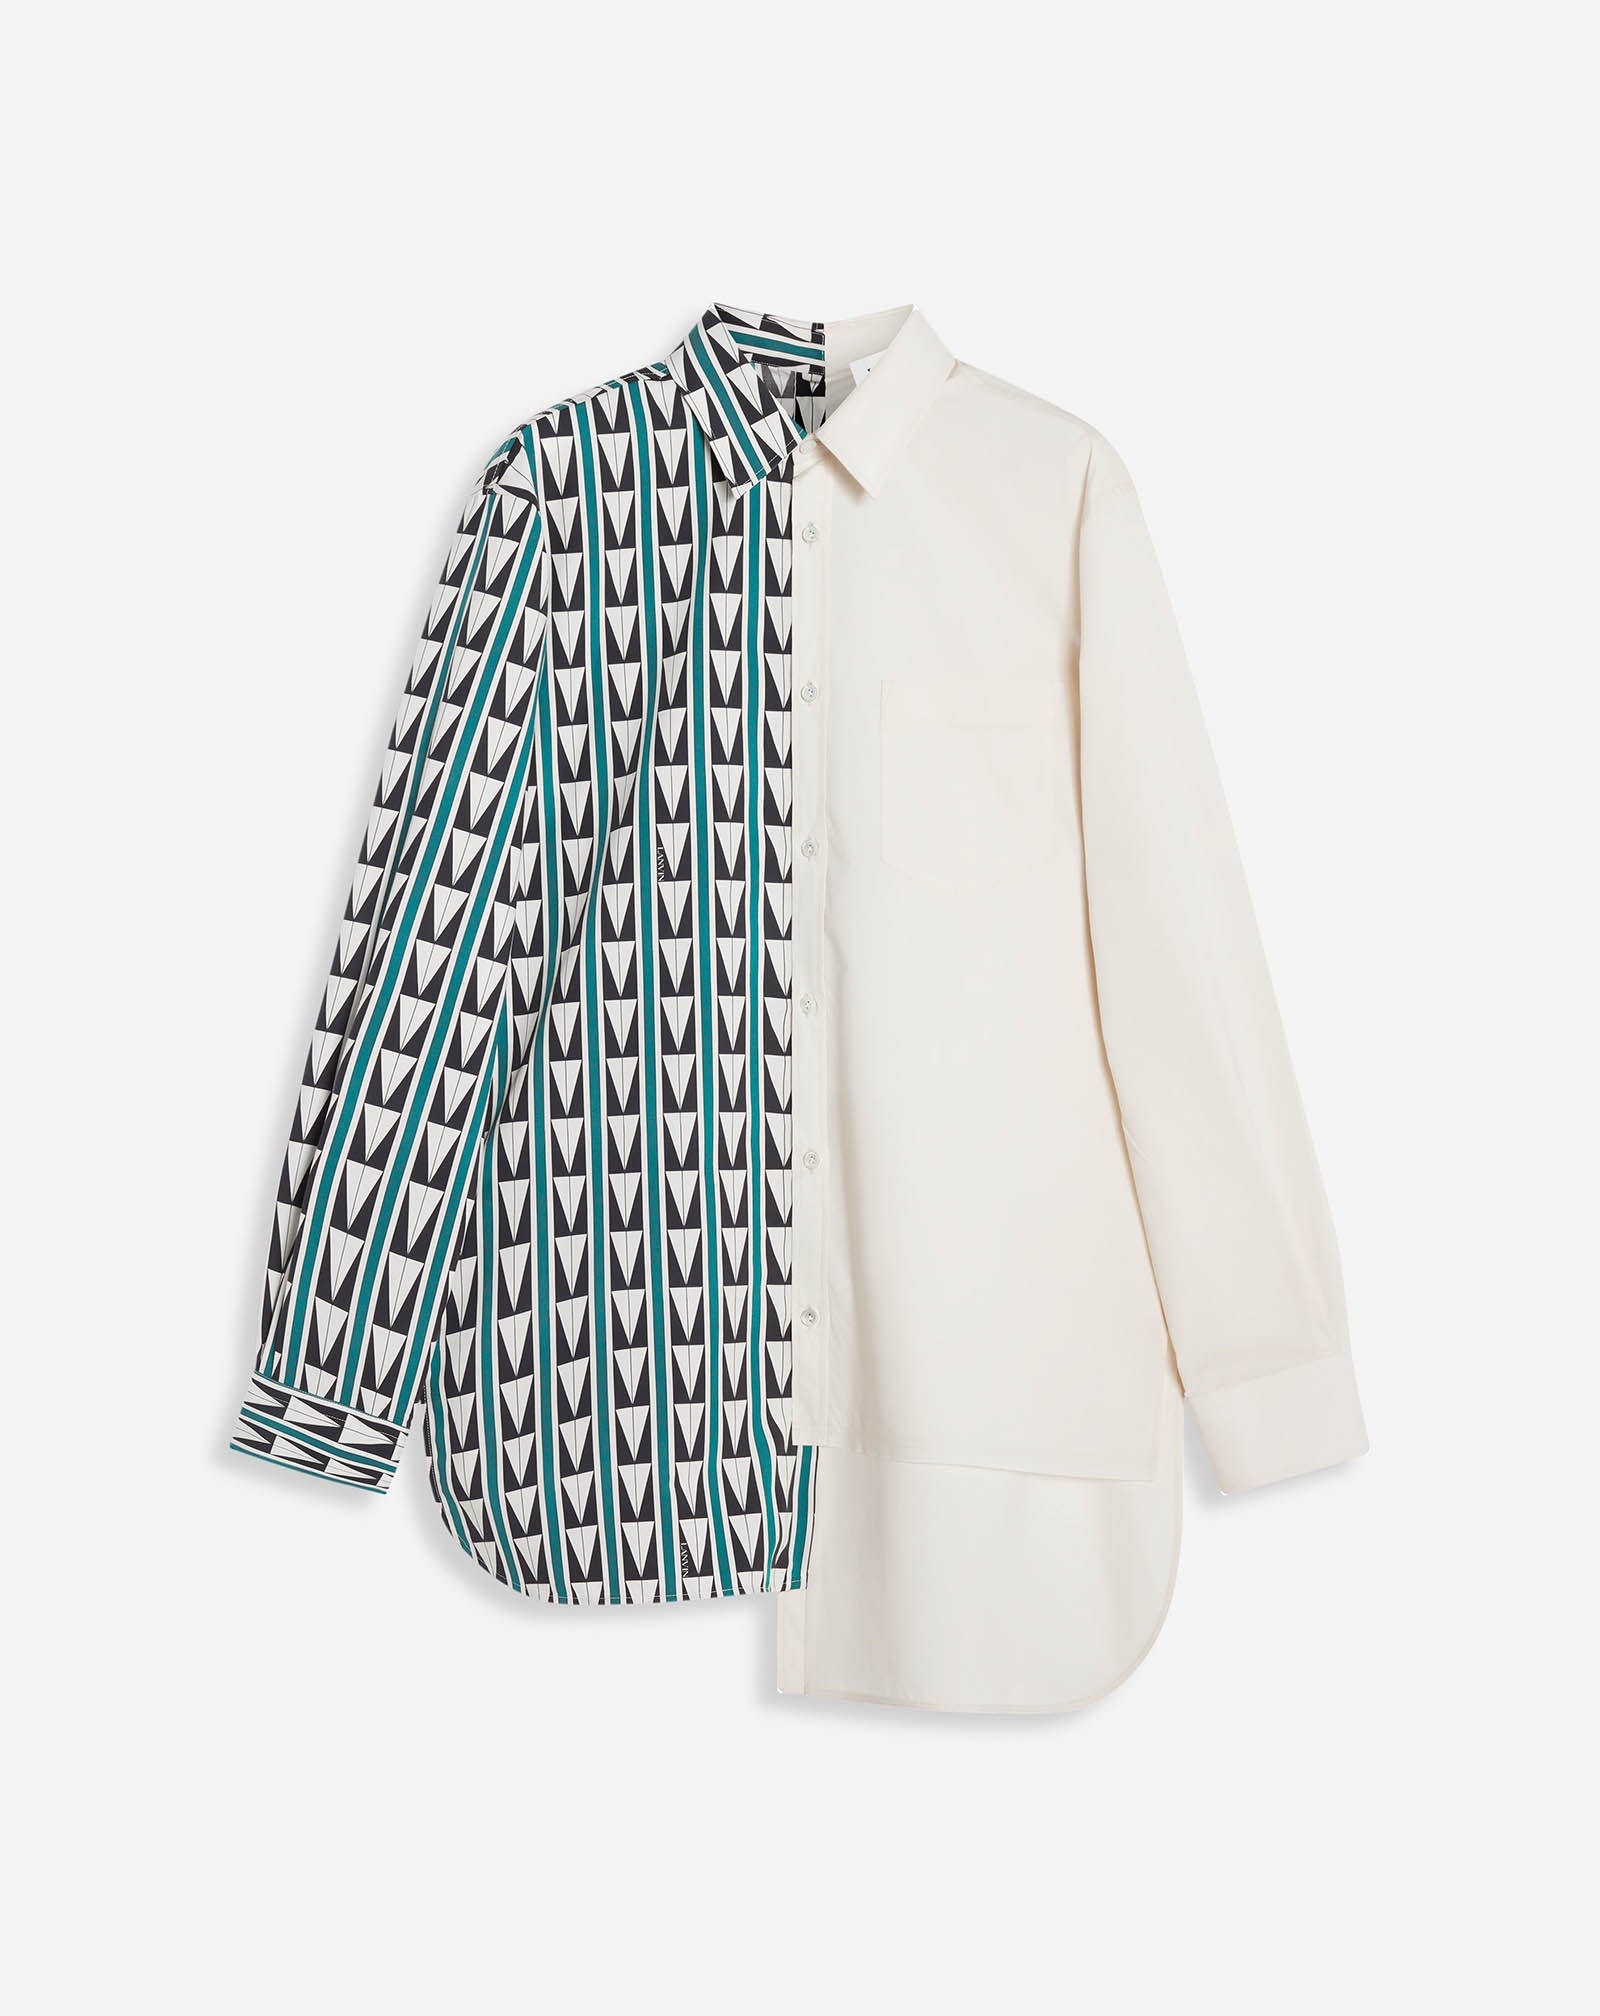 DUAL-PRINT SHIRT WITH ART DECO-INSPIRED TRIANGLES - 1